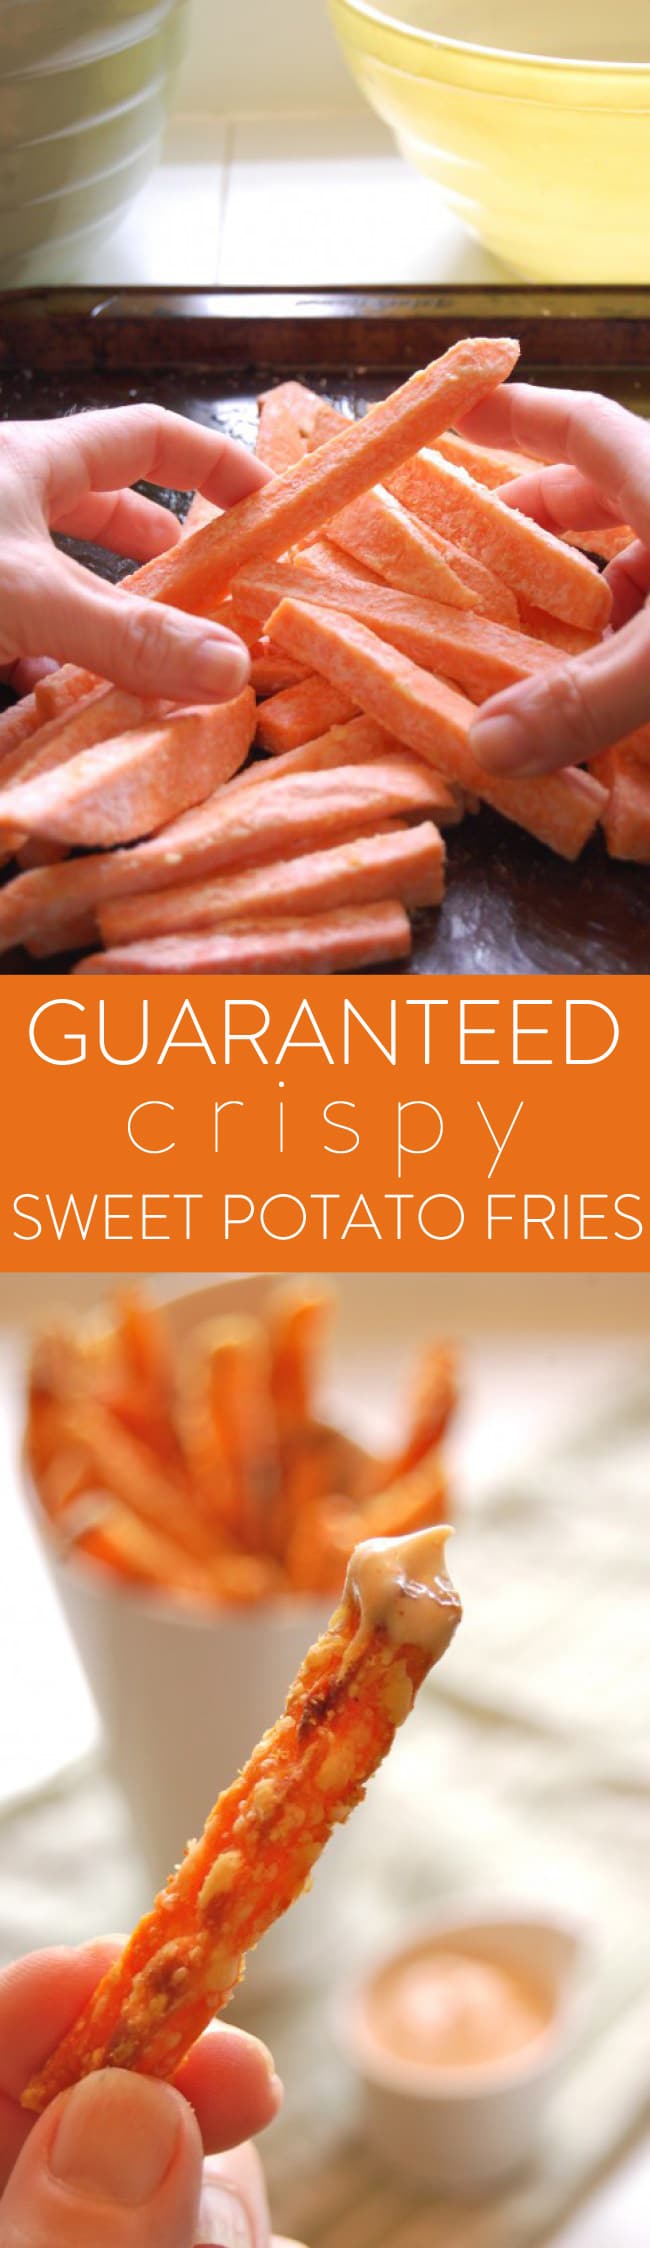 Yes. Guaranteed. Crispy. Sweet Potato Fries. There's one secret ingredient (corn starch, so not so secret) and a few tips and techniques that you have to follow. But if you do, it'll work and no more soggy sweet potato fries.